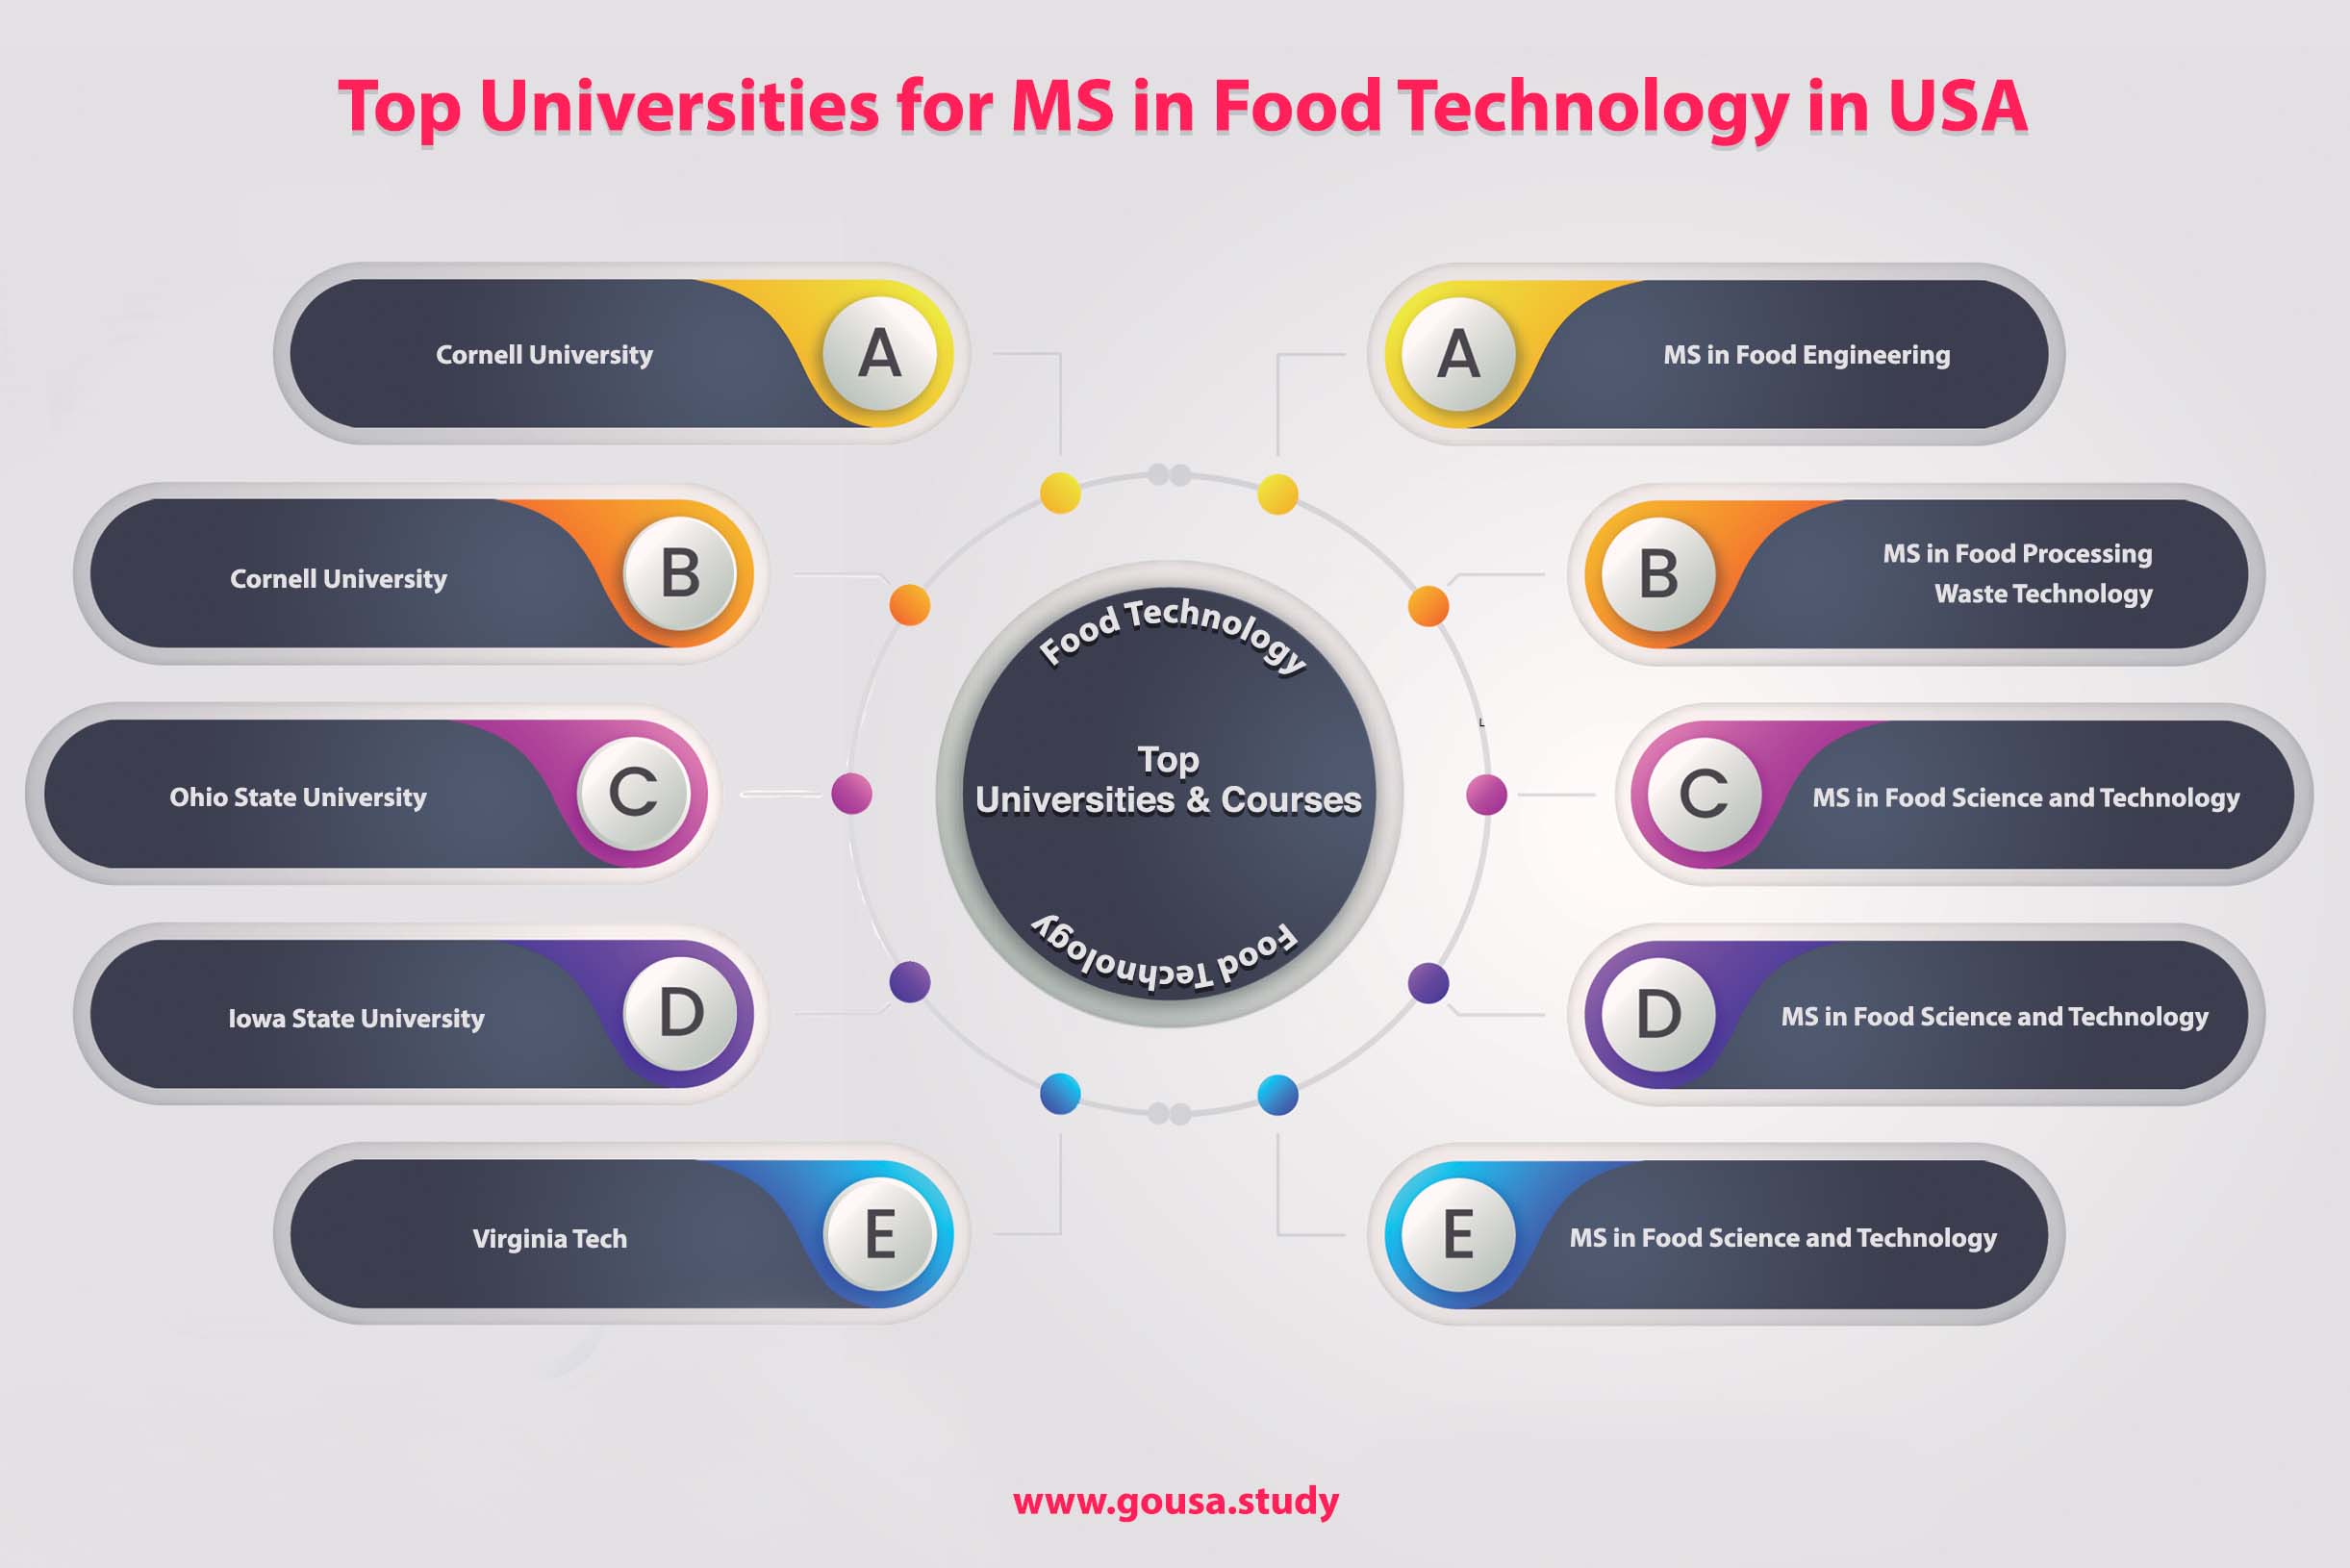 Top Universities for MS in Food Technology in USA